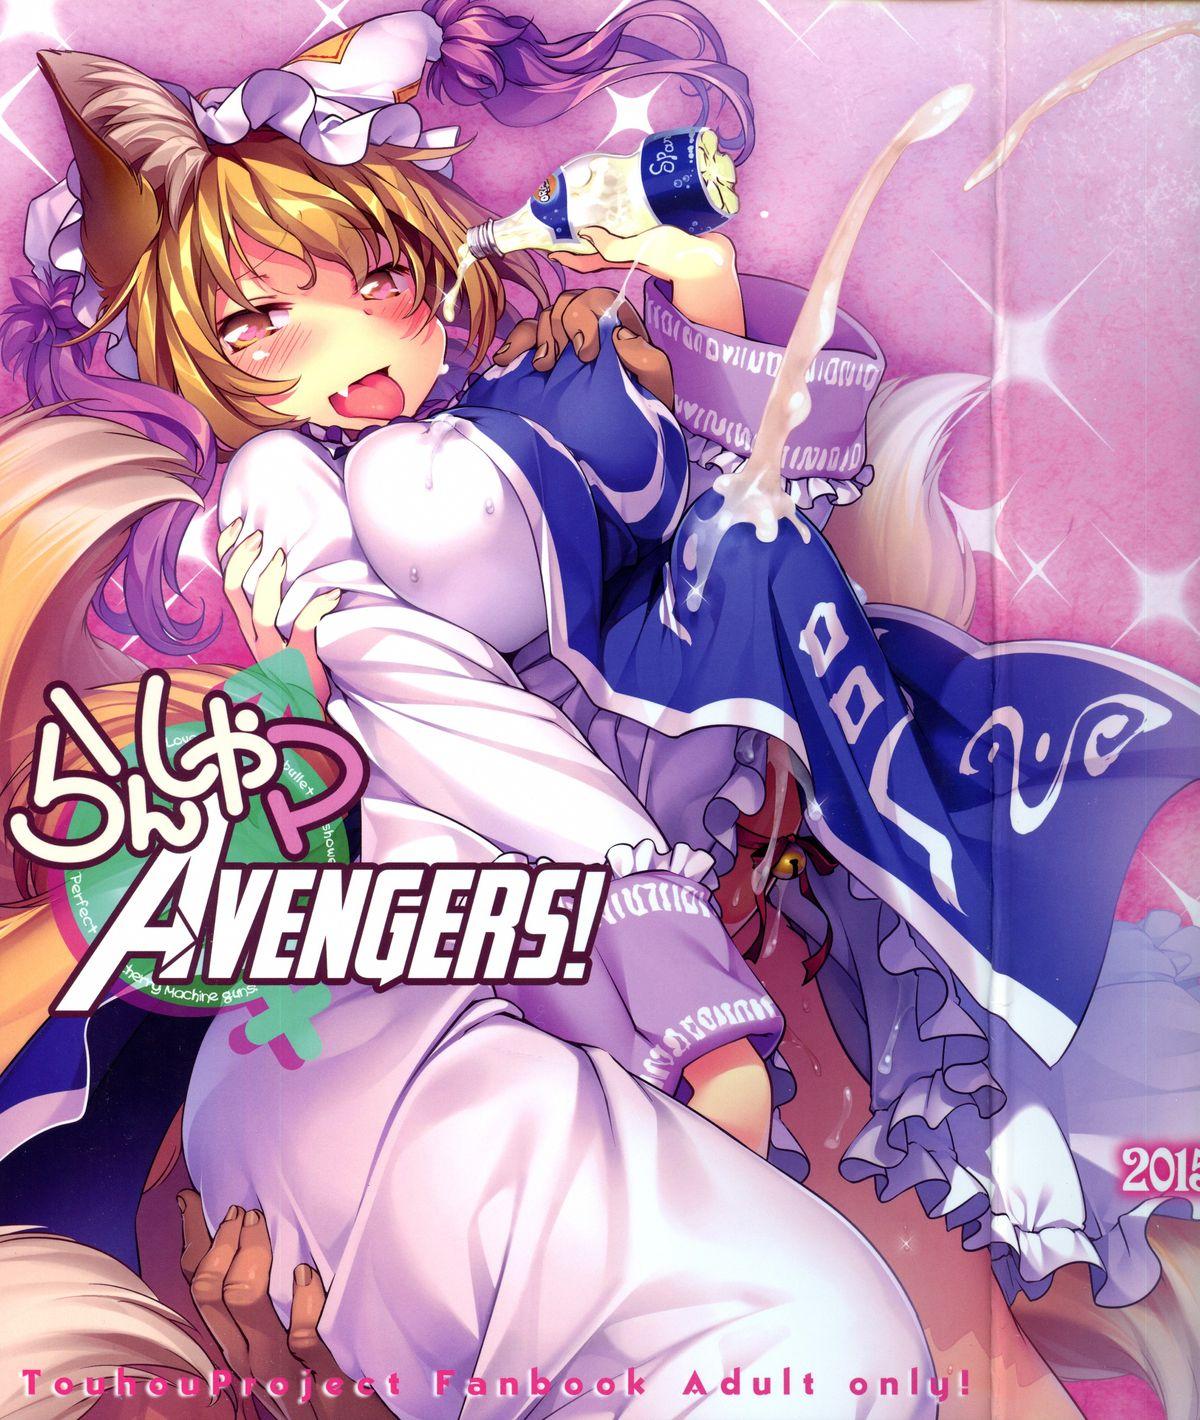 Office Sex Ran Shama Avengers! - Touhou project  - Picture 1